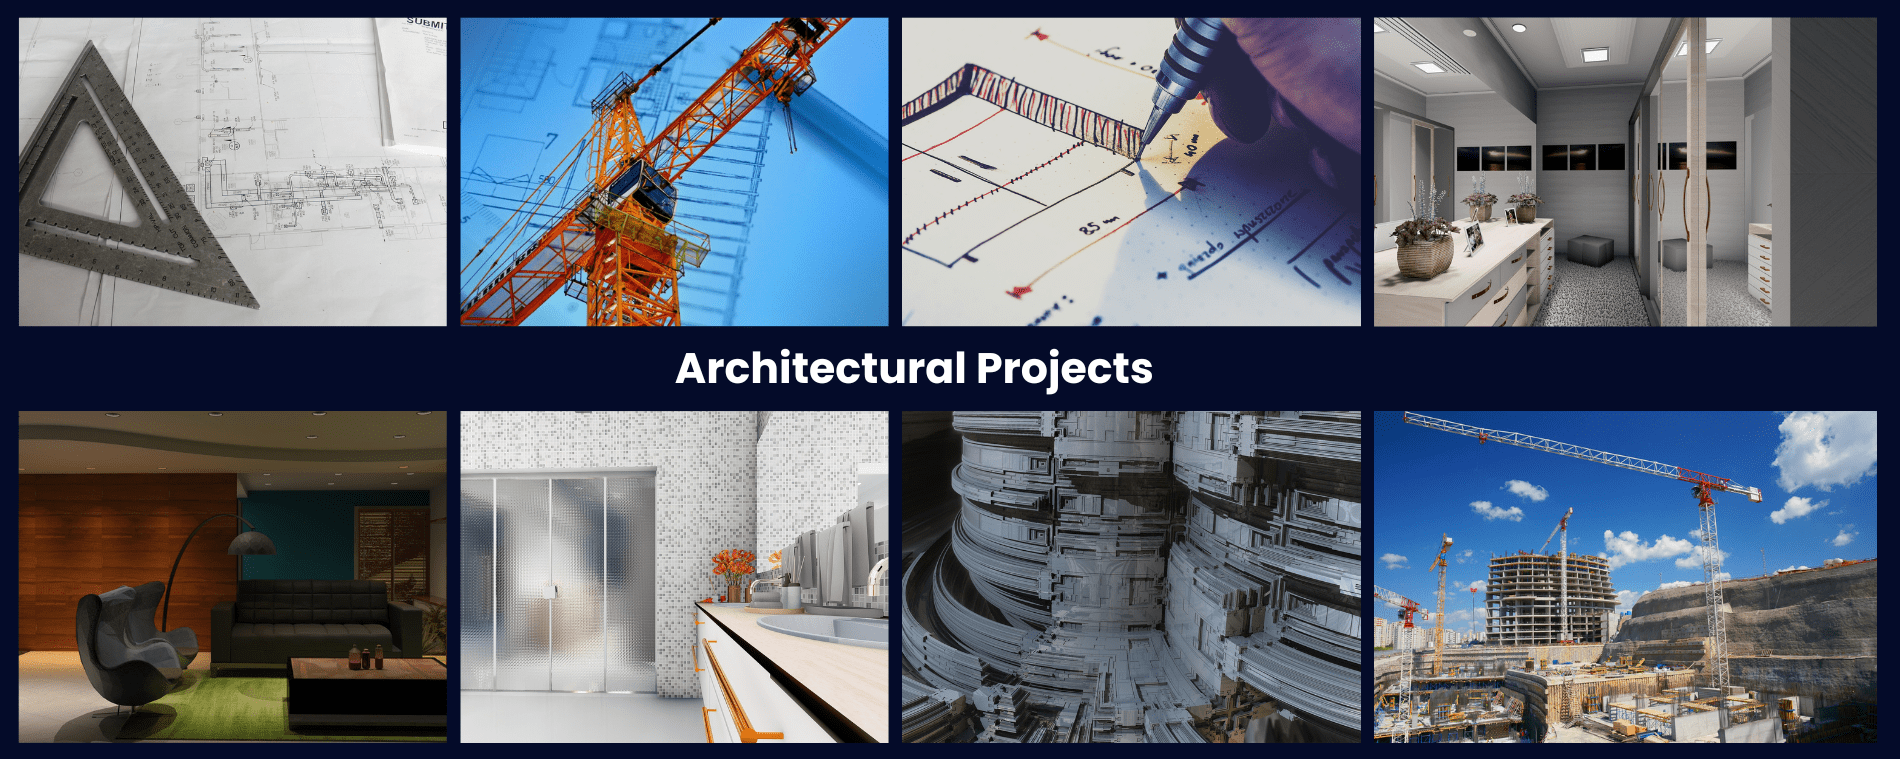 Second slide Architectural Projects